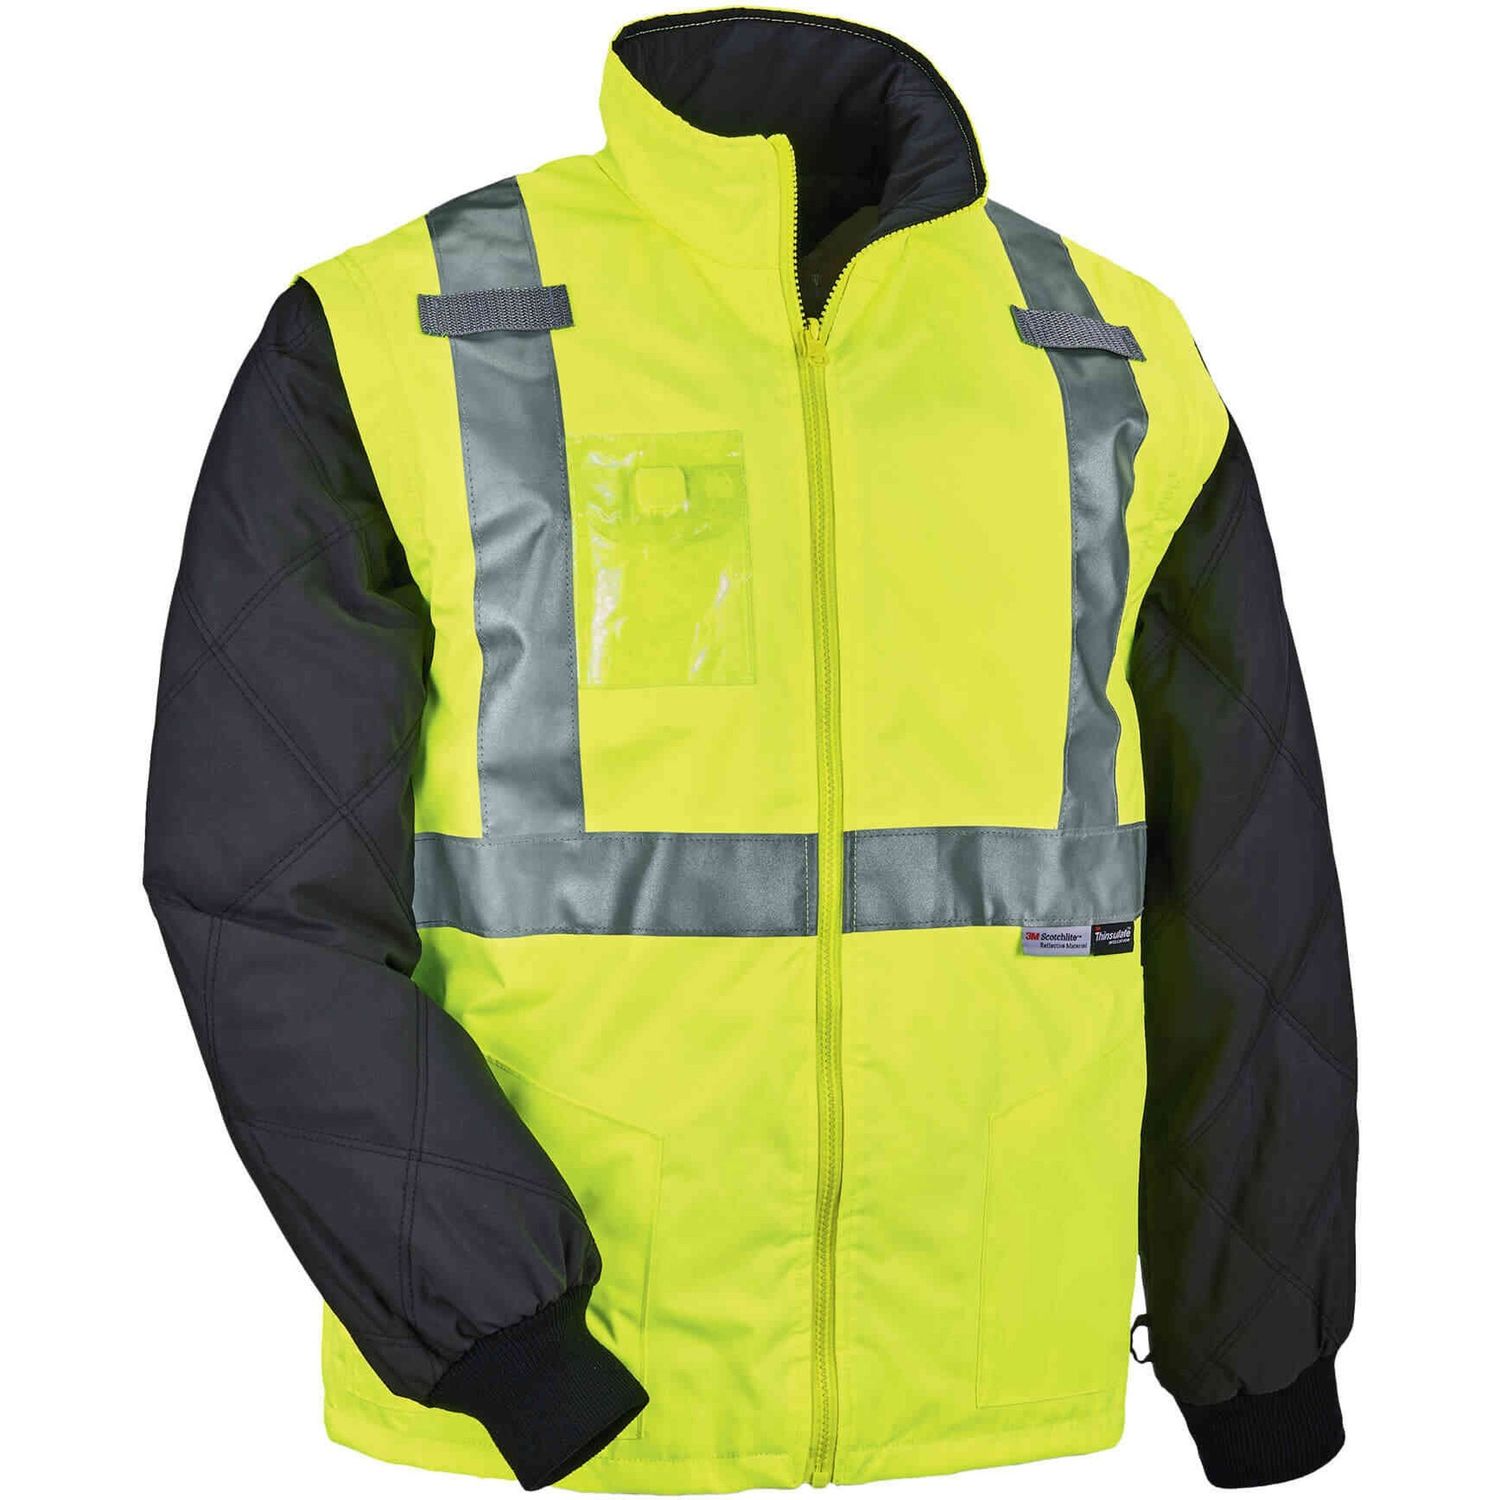 8287 Type R Class 2 Hi-Vis Jacket w/ Removable Sleeves Recommended for: Accessories, Gloves, Cell Phone, Transportation